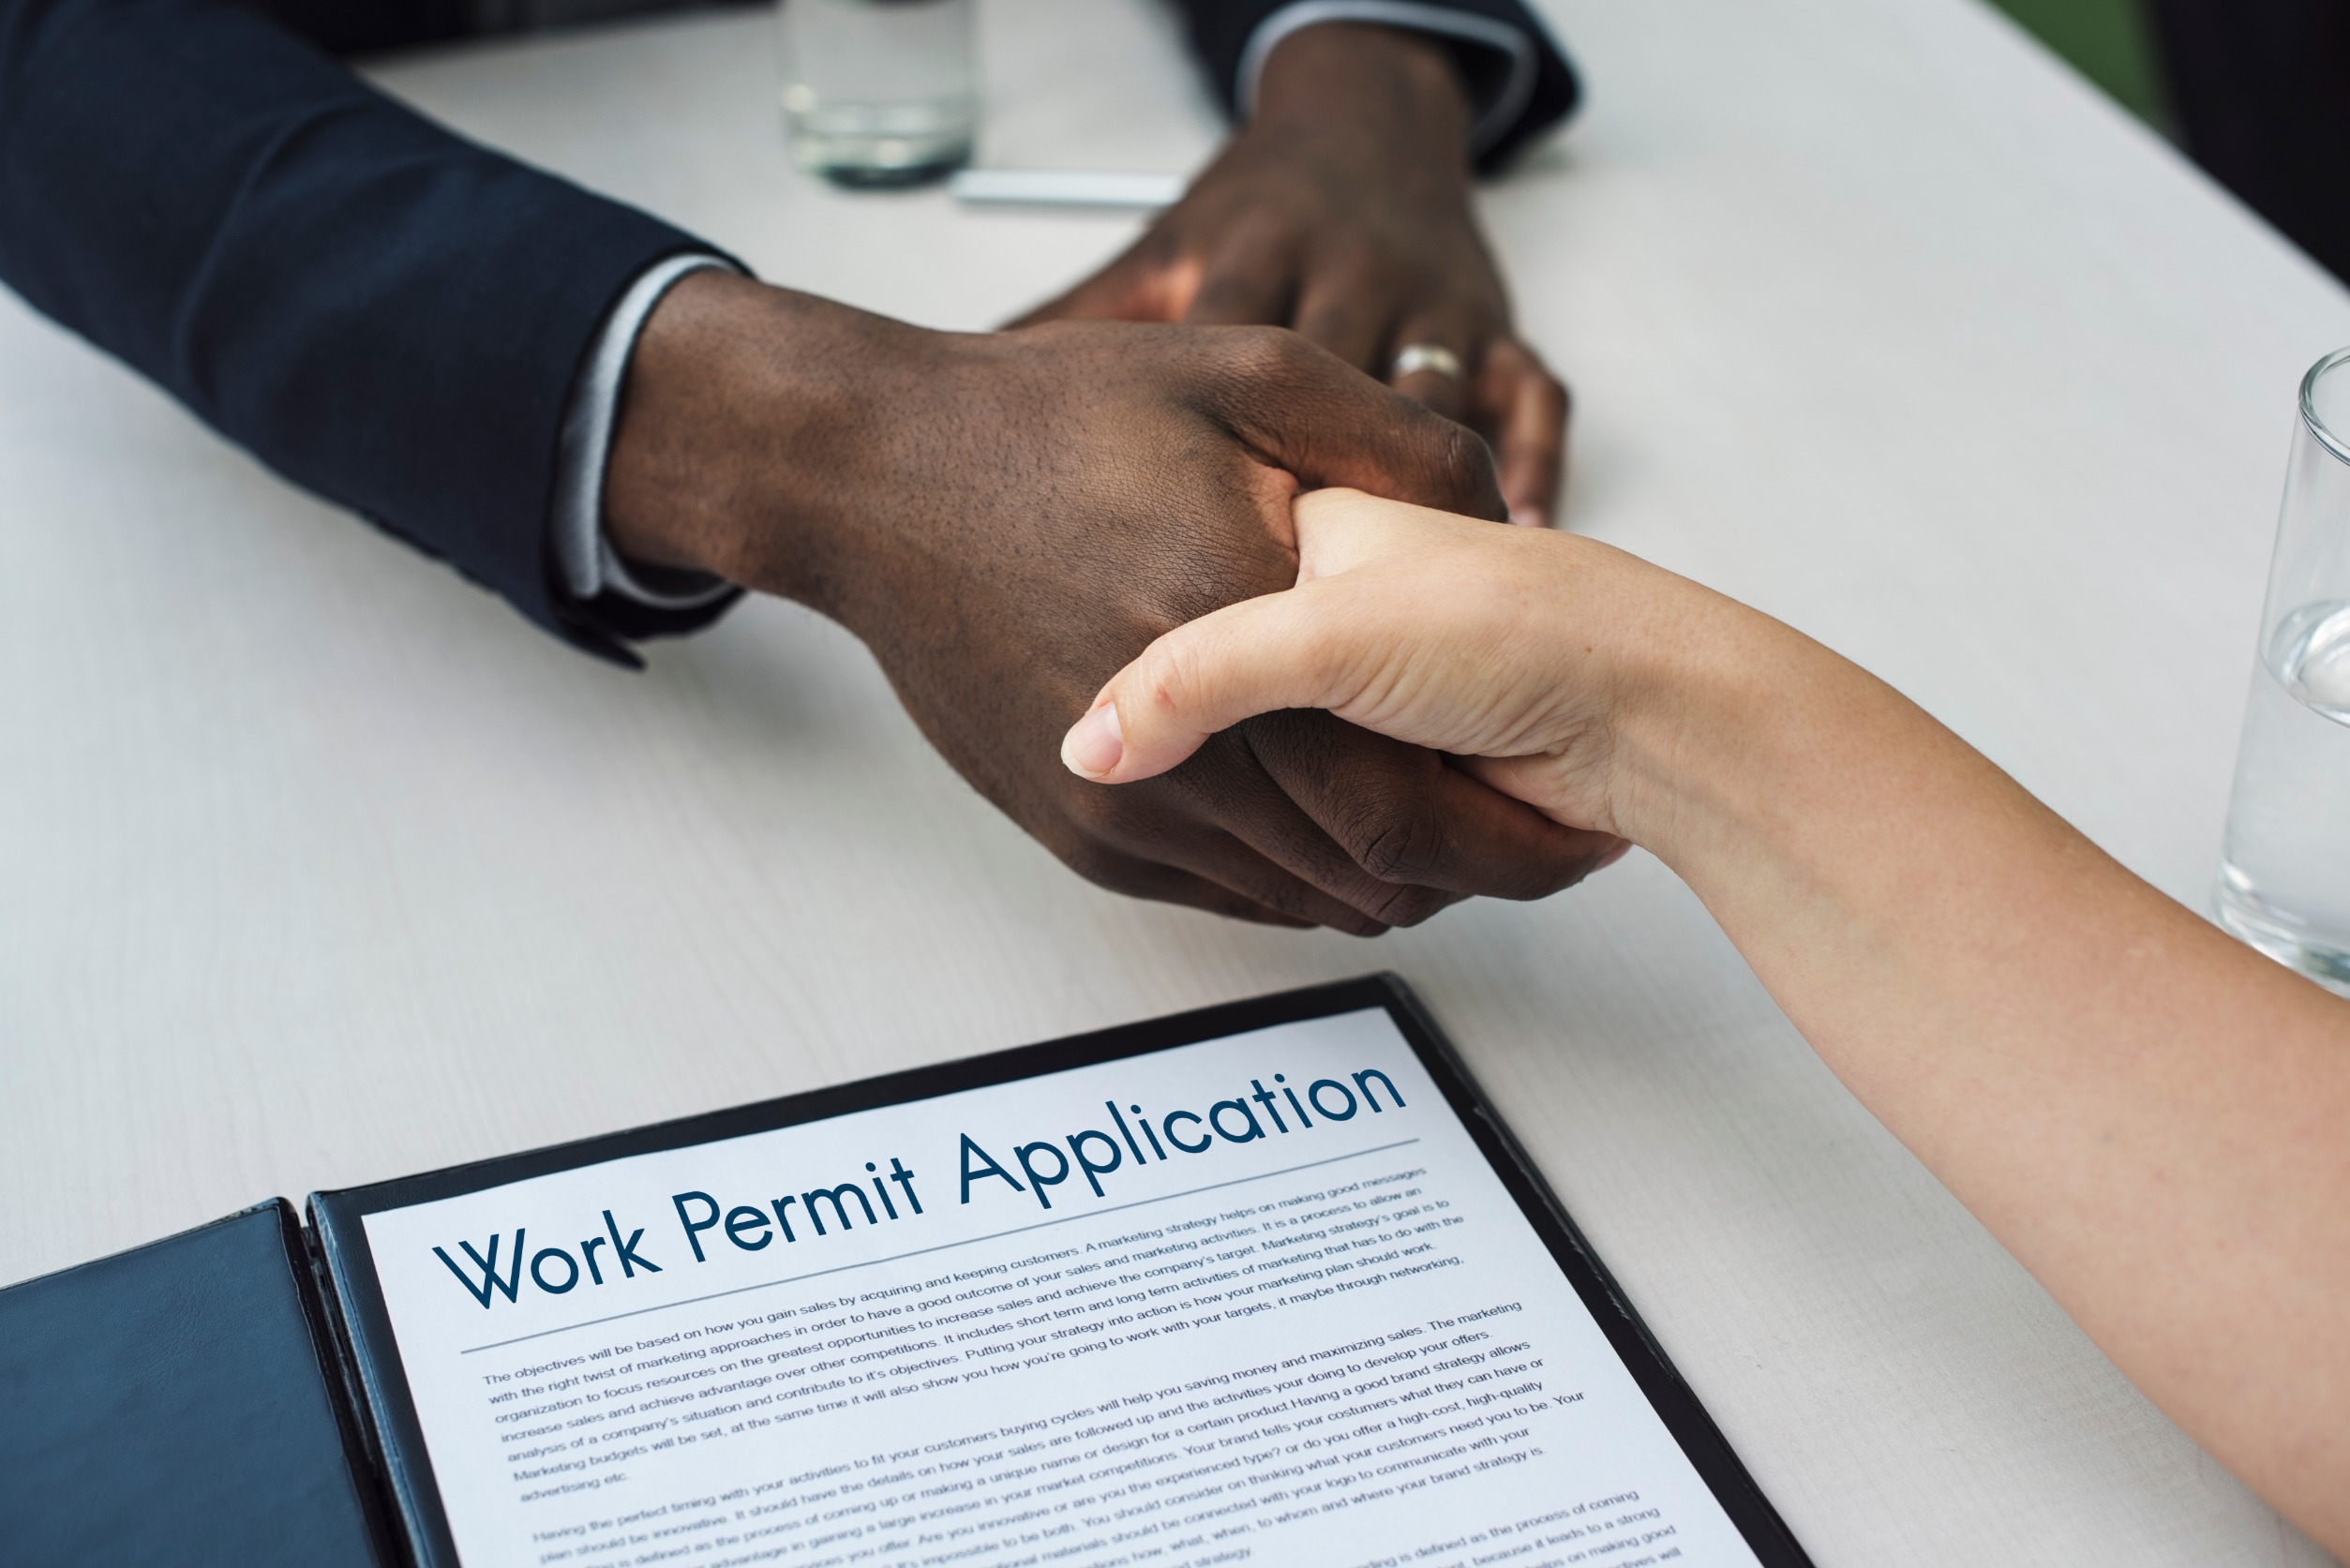 Work Permit Sweden: New System Explained